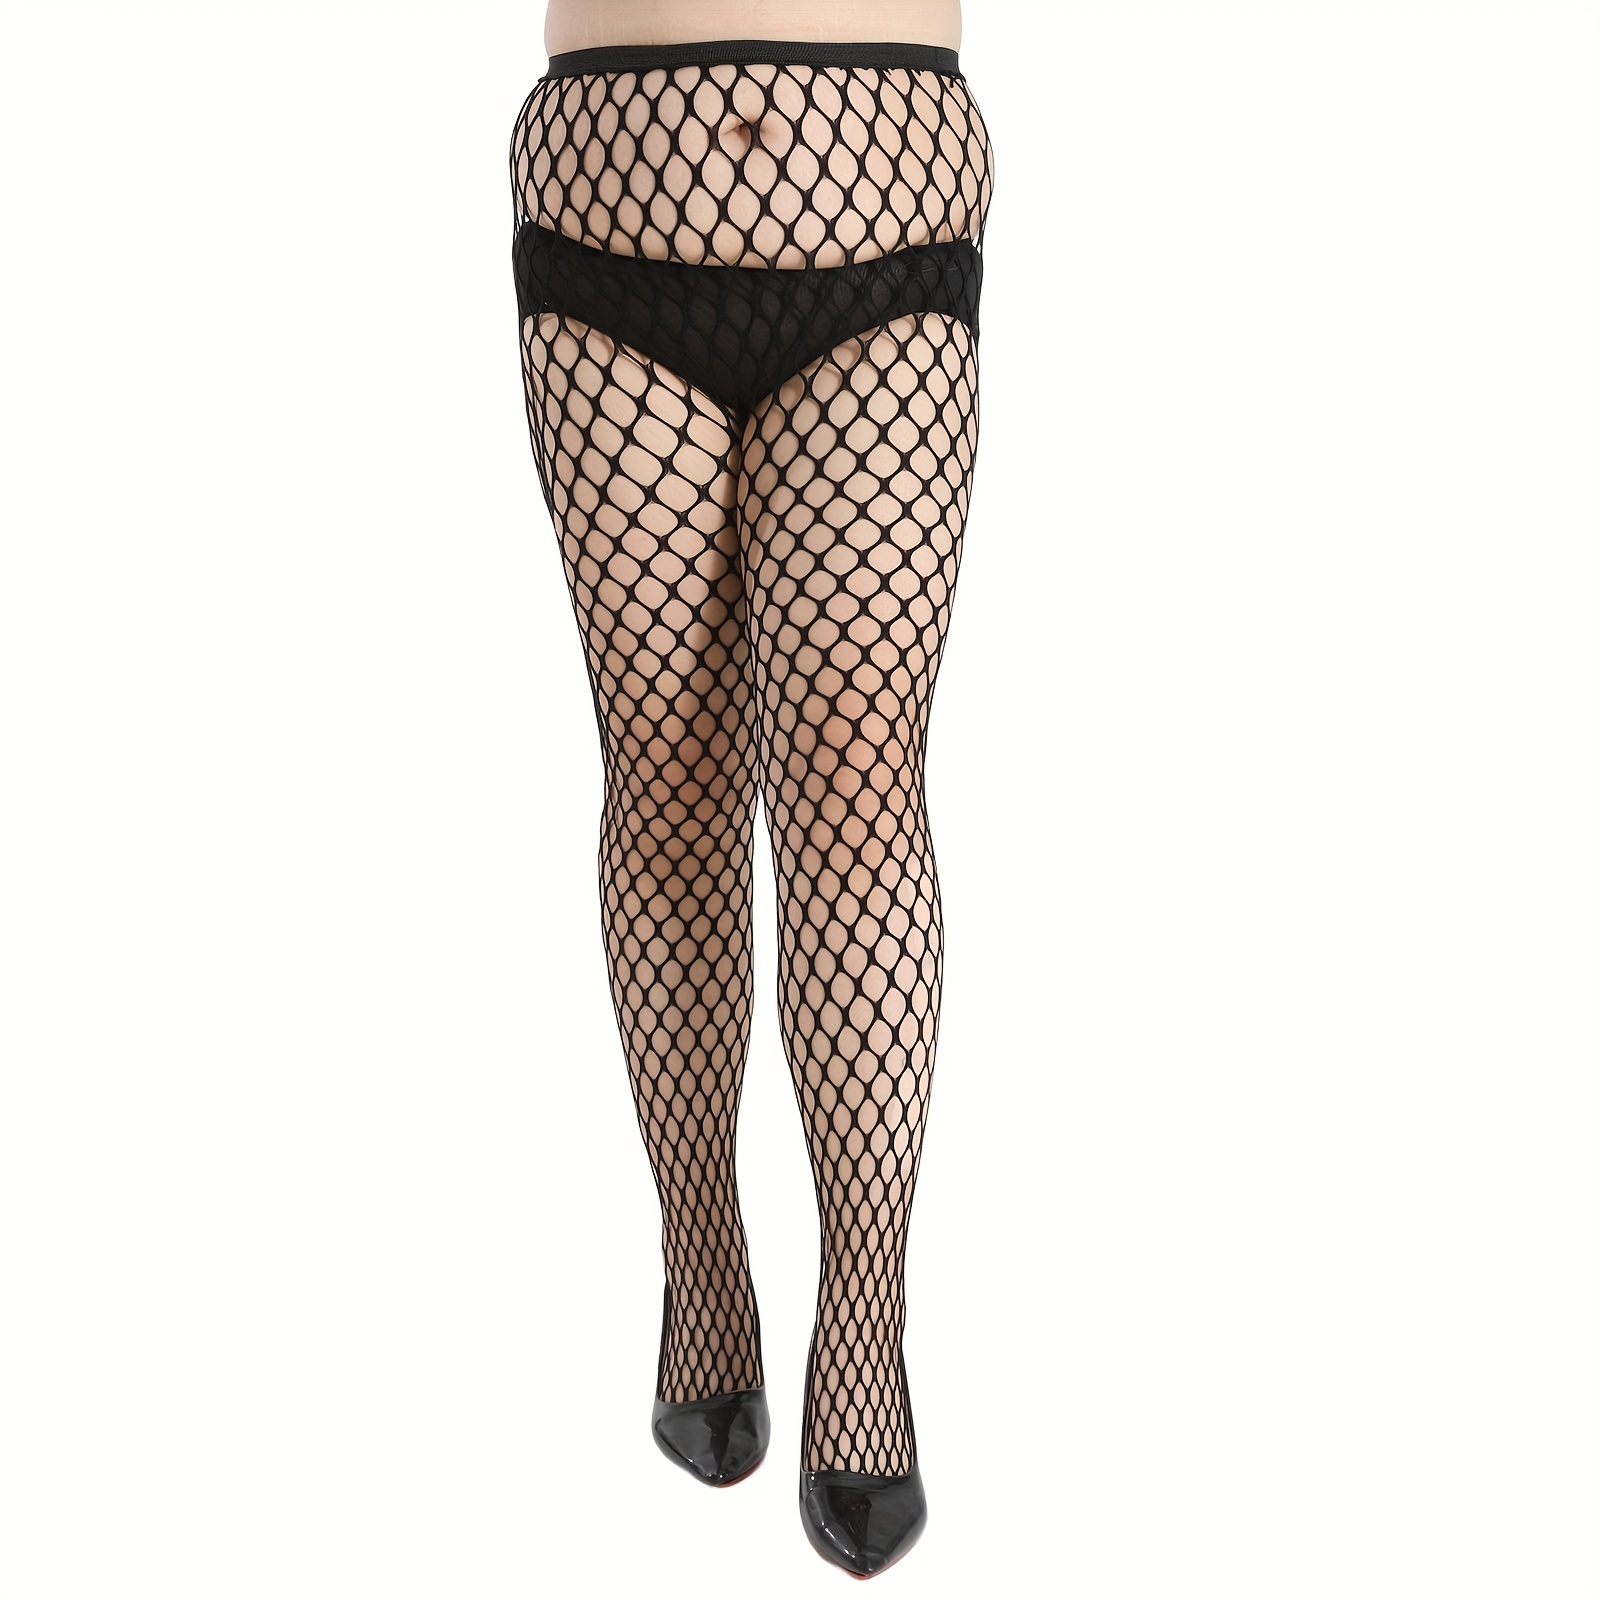 Plus Size Casual Pantyhose, Women's Plus Solid Round Hole High Waist  Fishnet Tights